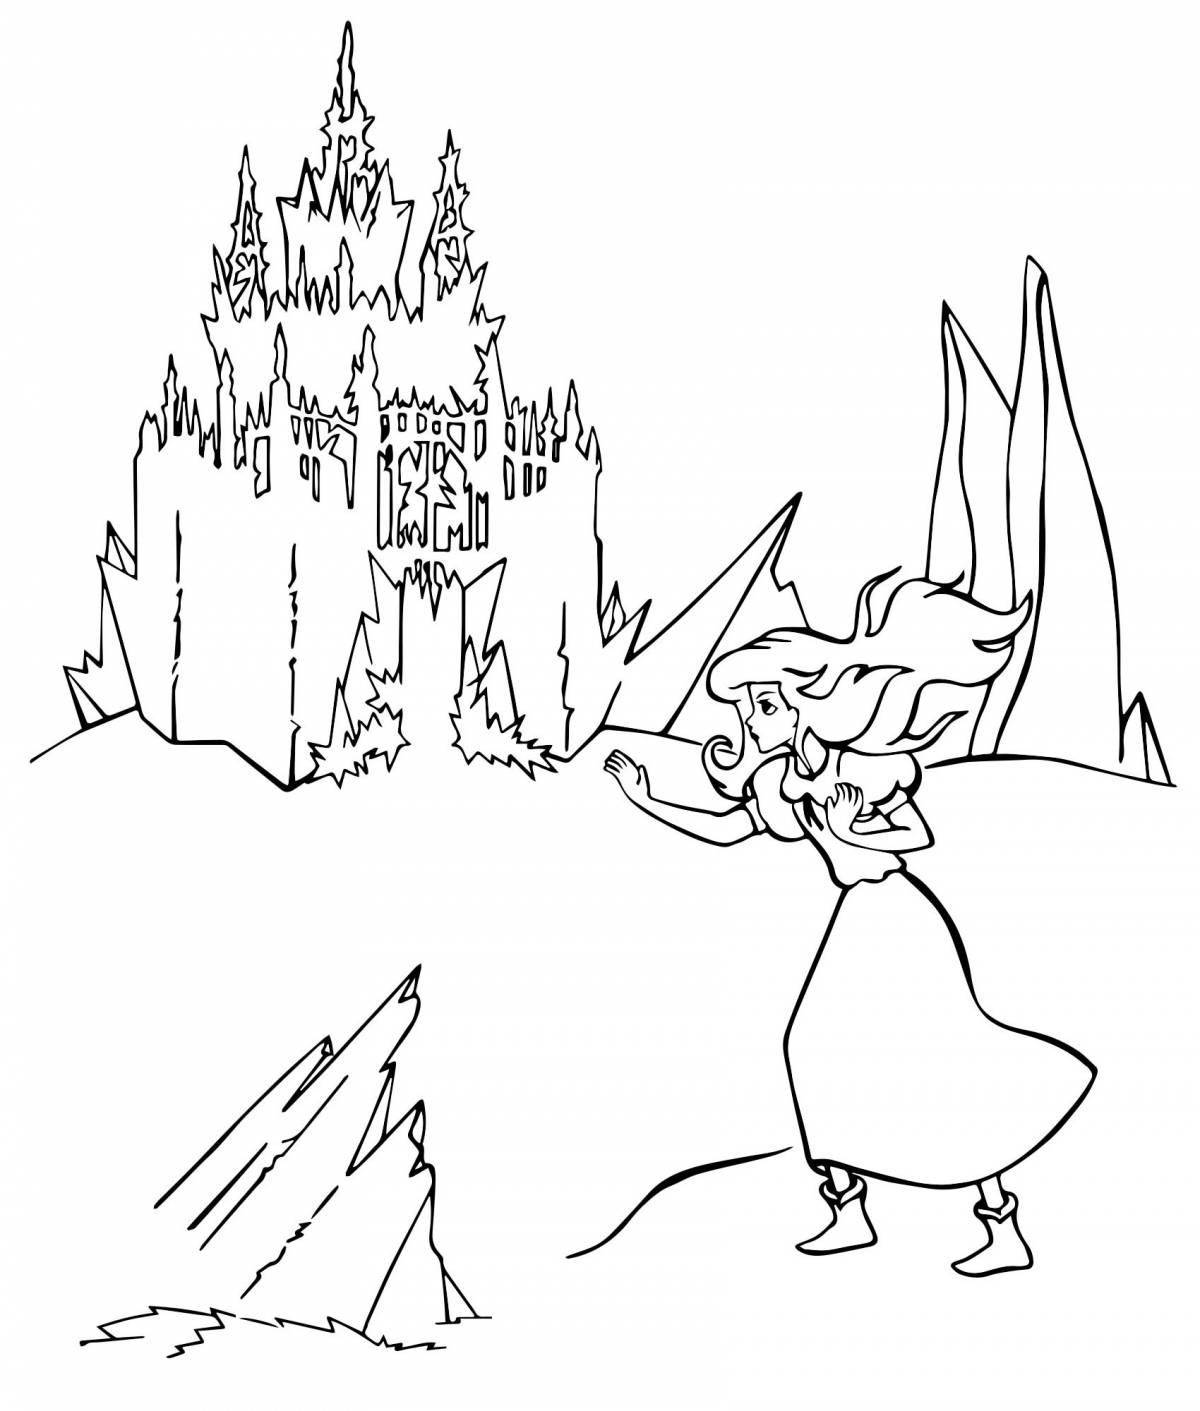 Gorgeous snow queen coloring page